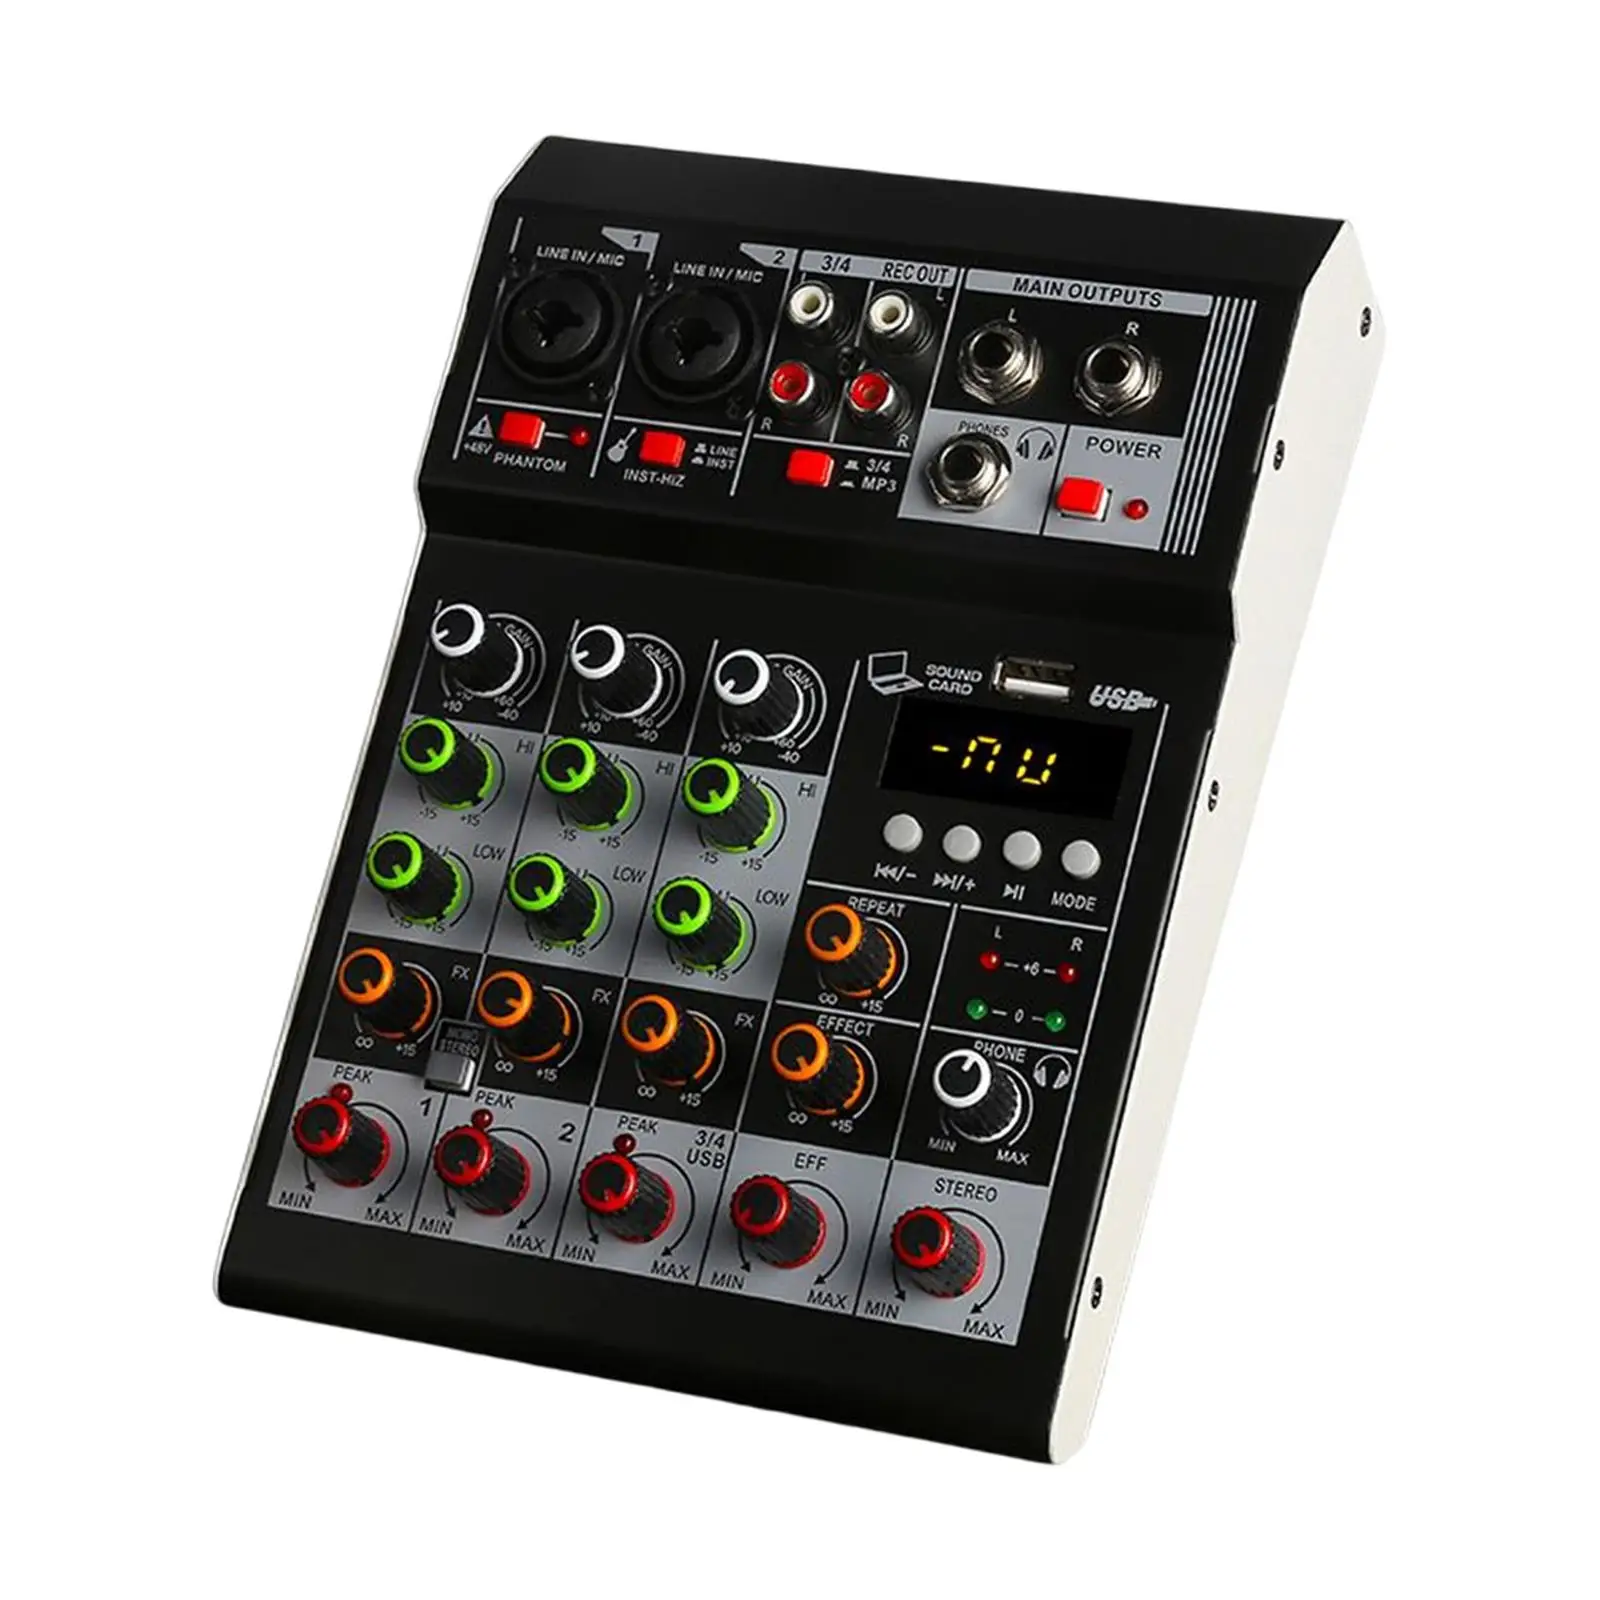 Professional 4 Channel Compact Studio Mixer Computer Recording Input Instant Listening for Broadcast Home Studio Recording Bands